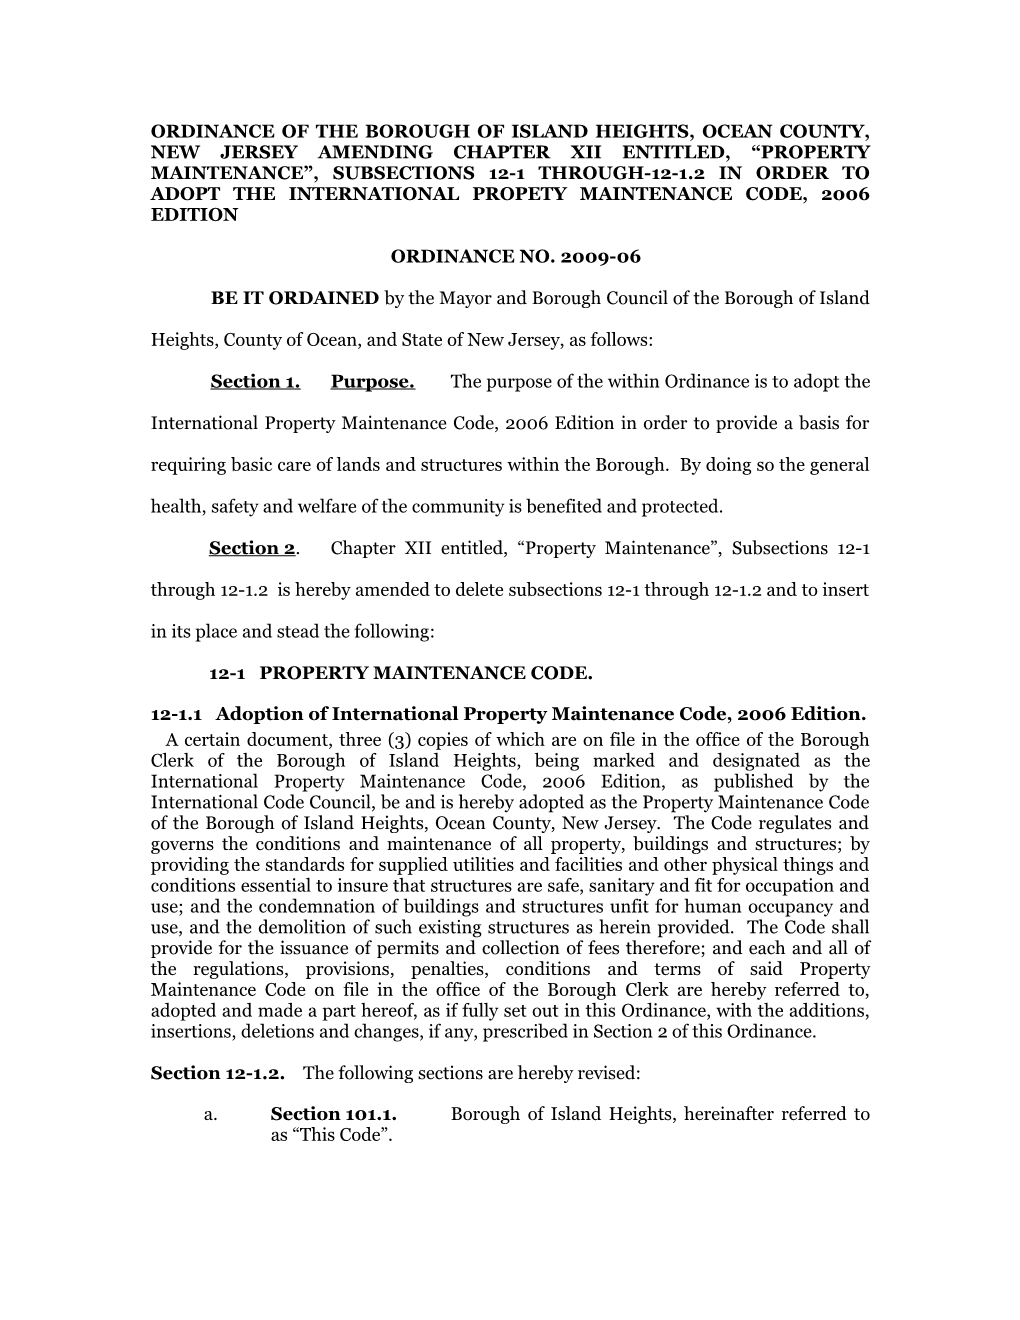 Ordinance of the Borough of Island Heights, Ocean County, New Jersey Amending Chapter Xii